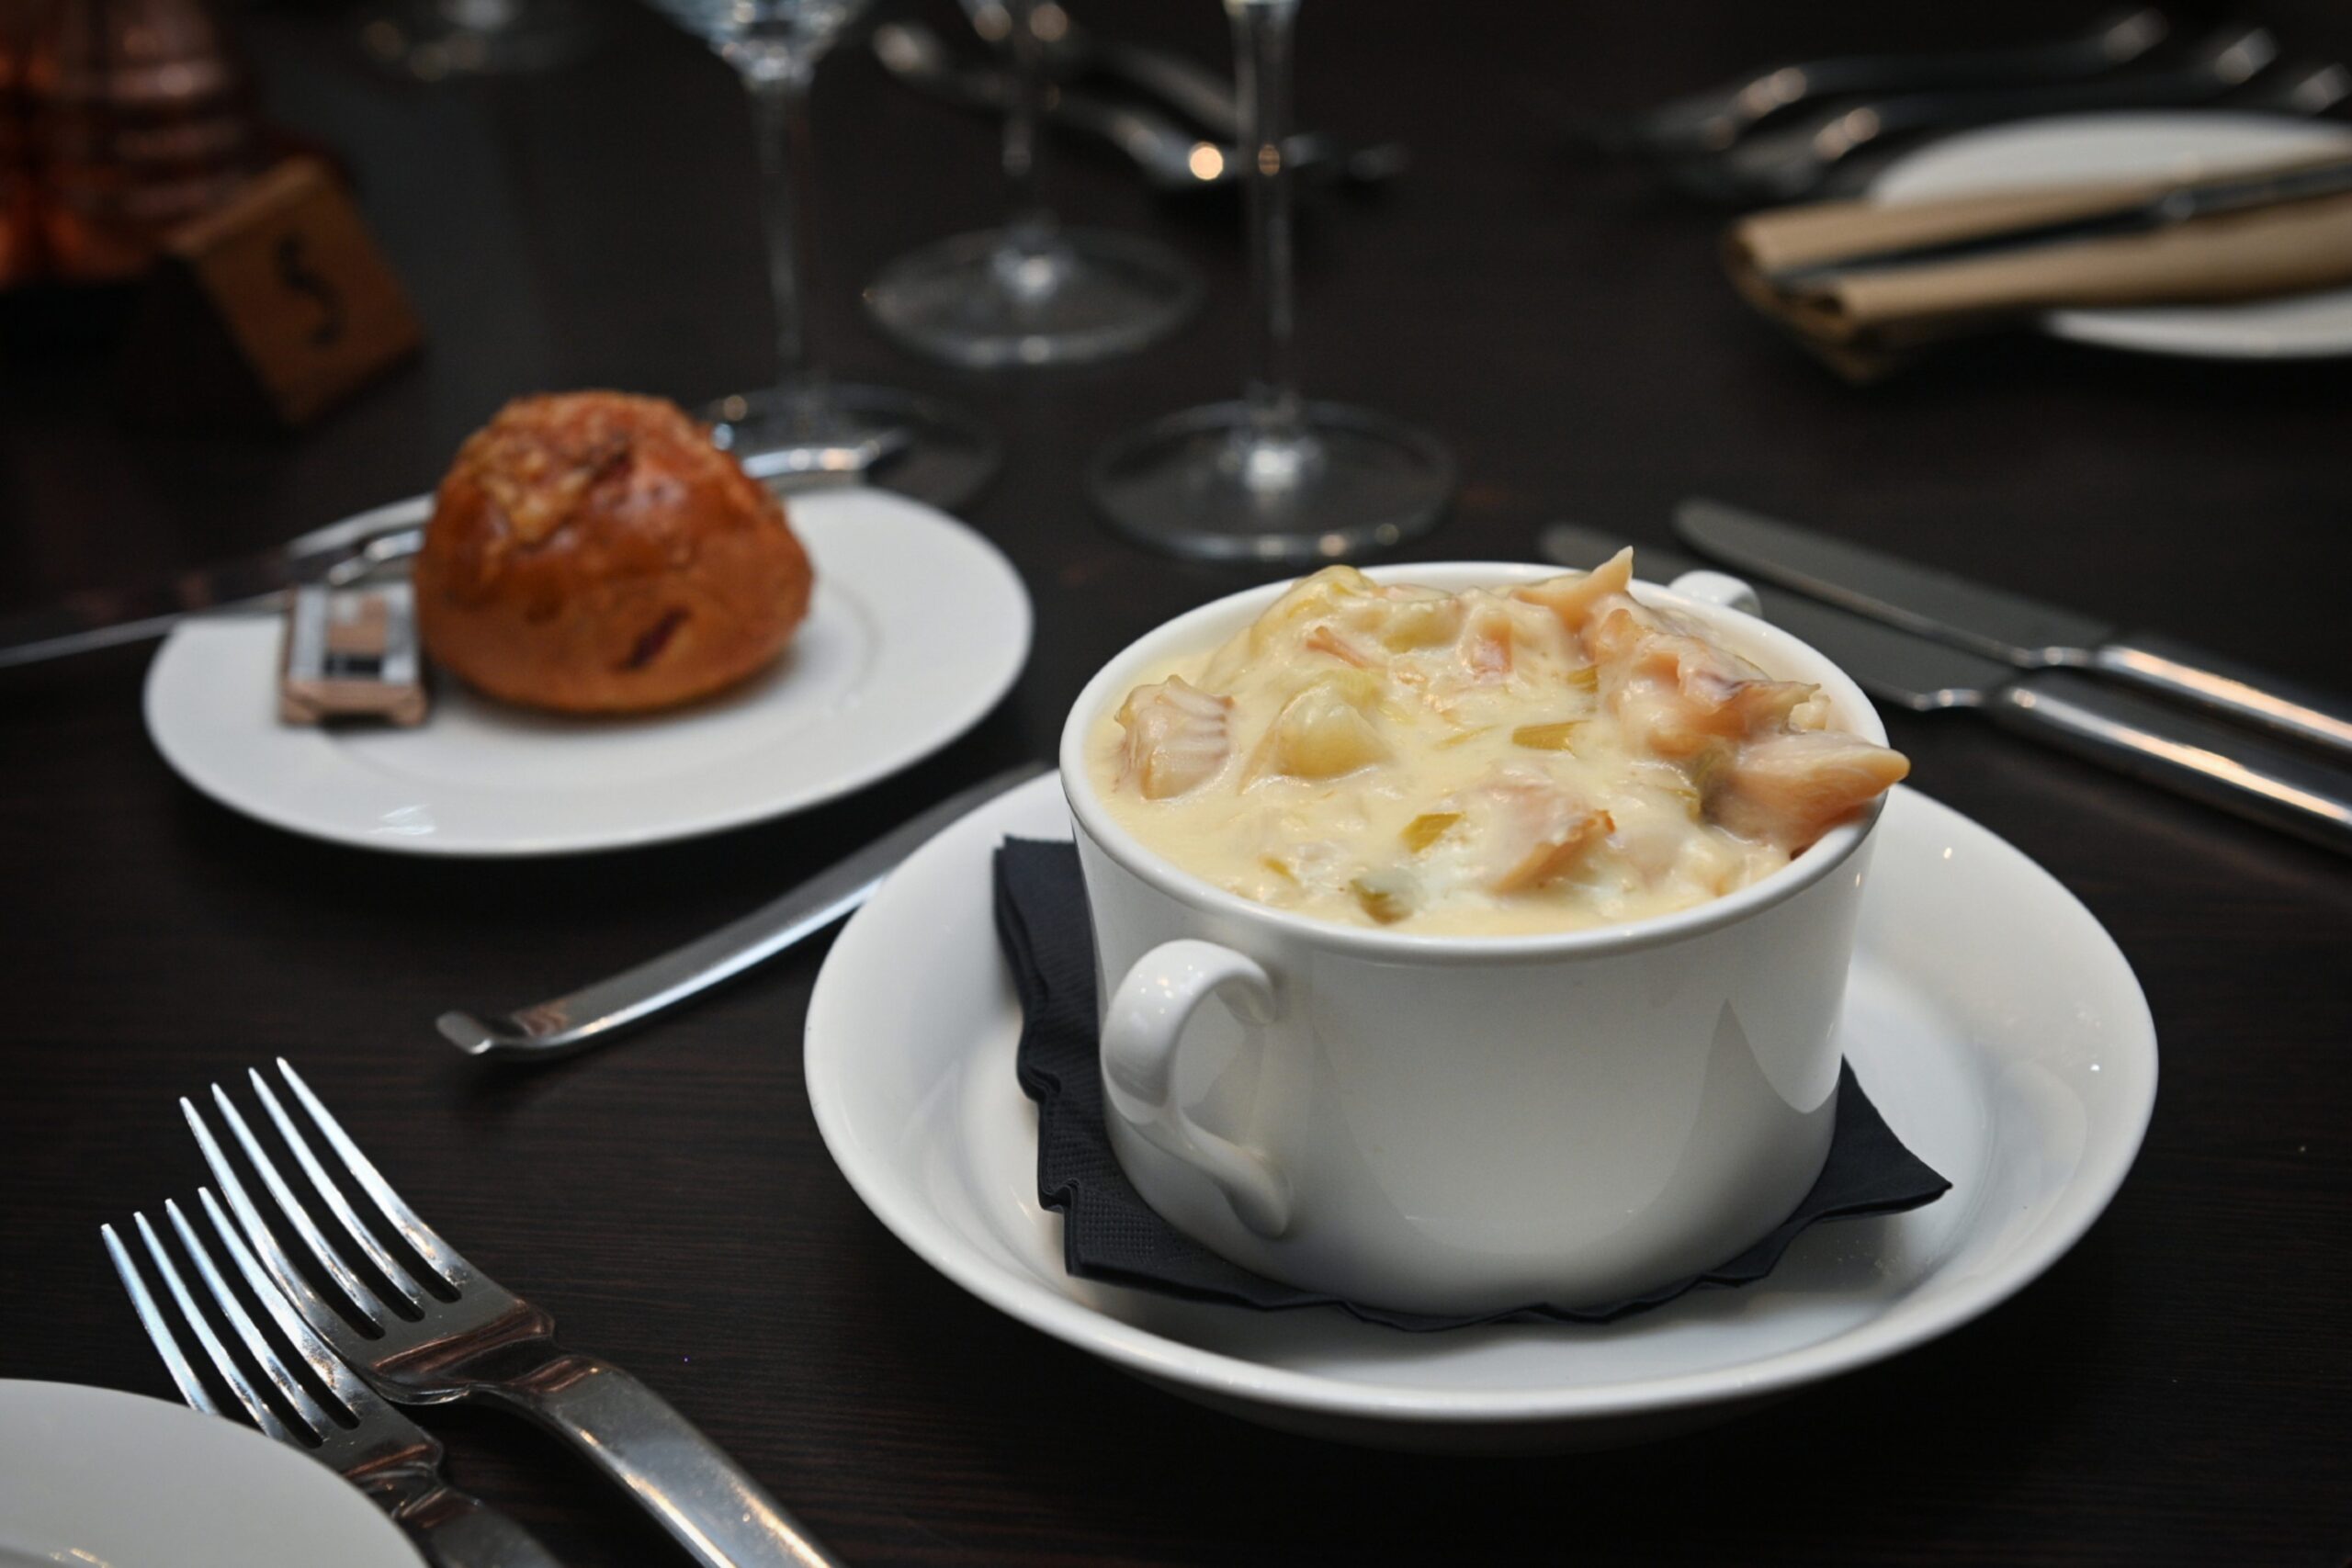 Cullen Skink with homemade artisan bread at The Seafield Arms in Moray.